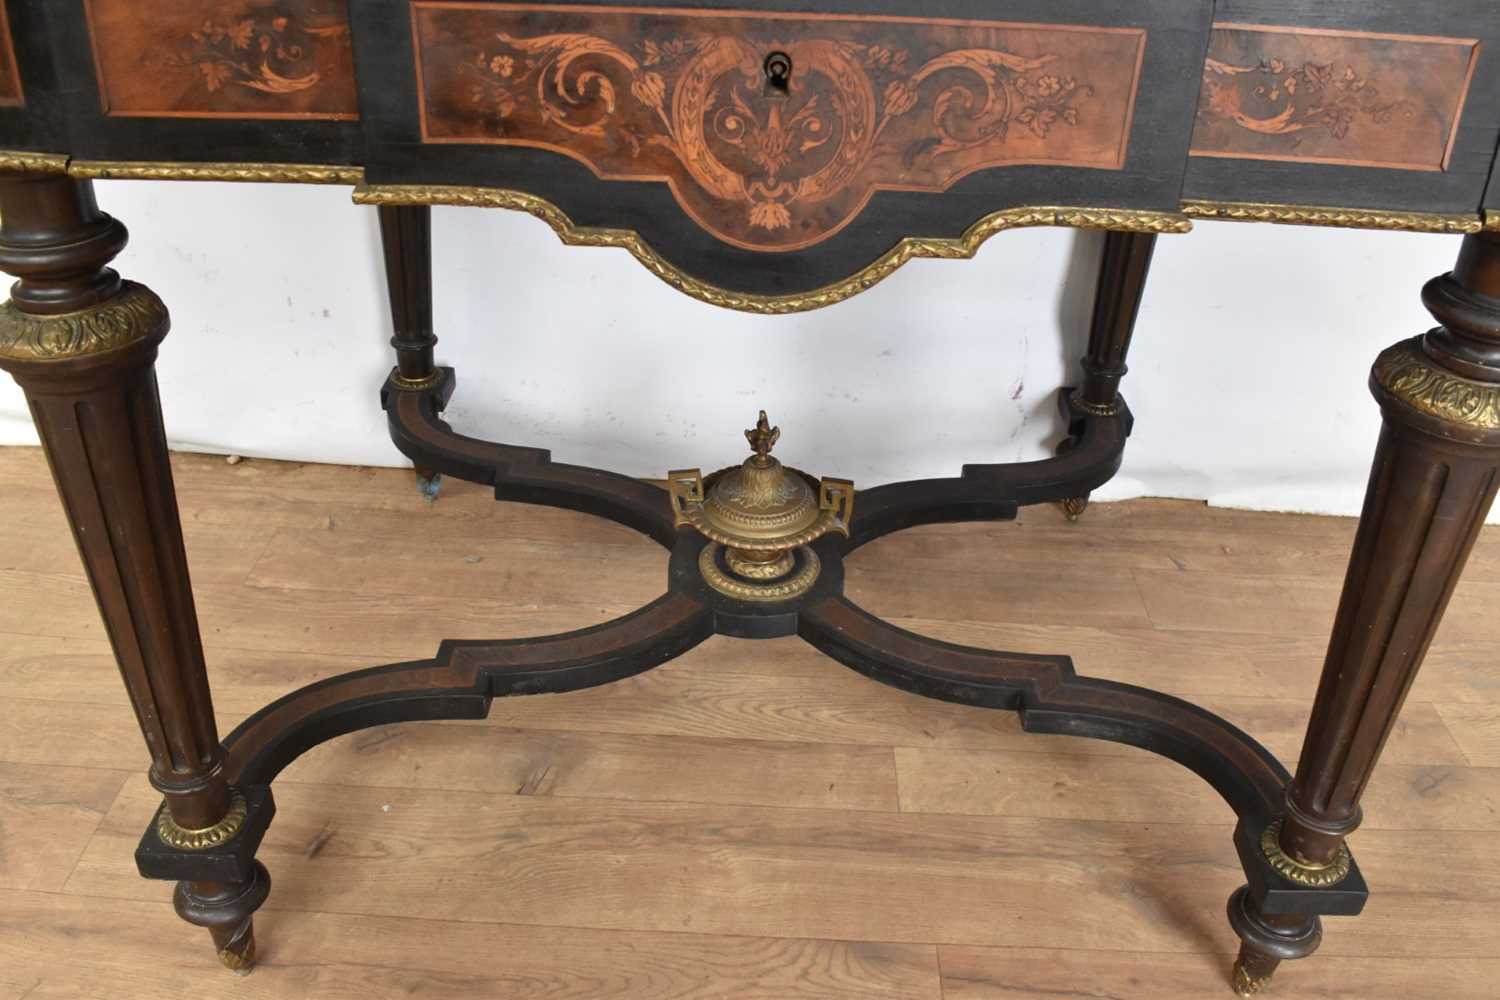 Good 19th century marquetry and ormolu mounted table - Image 5 of 17